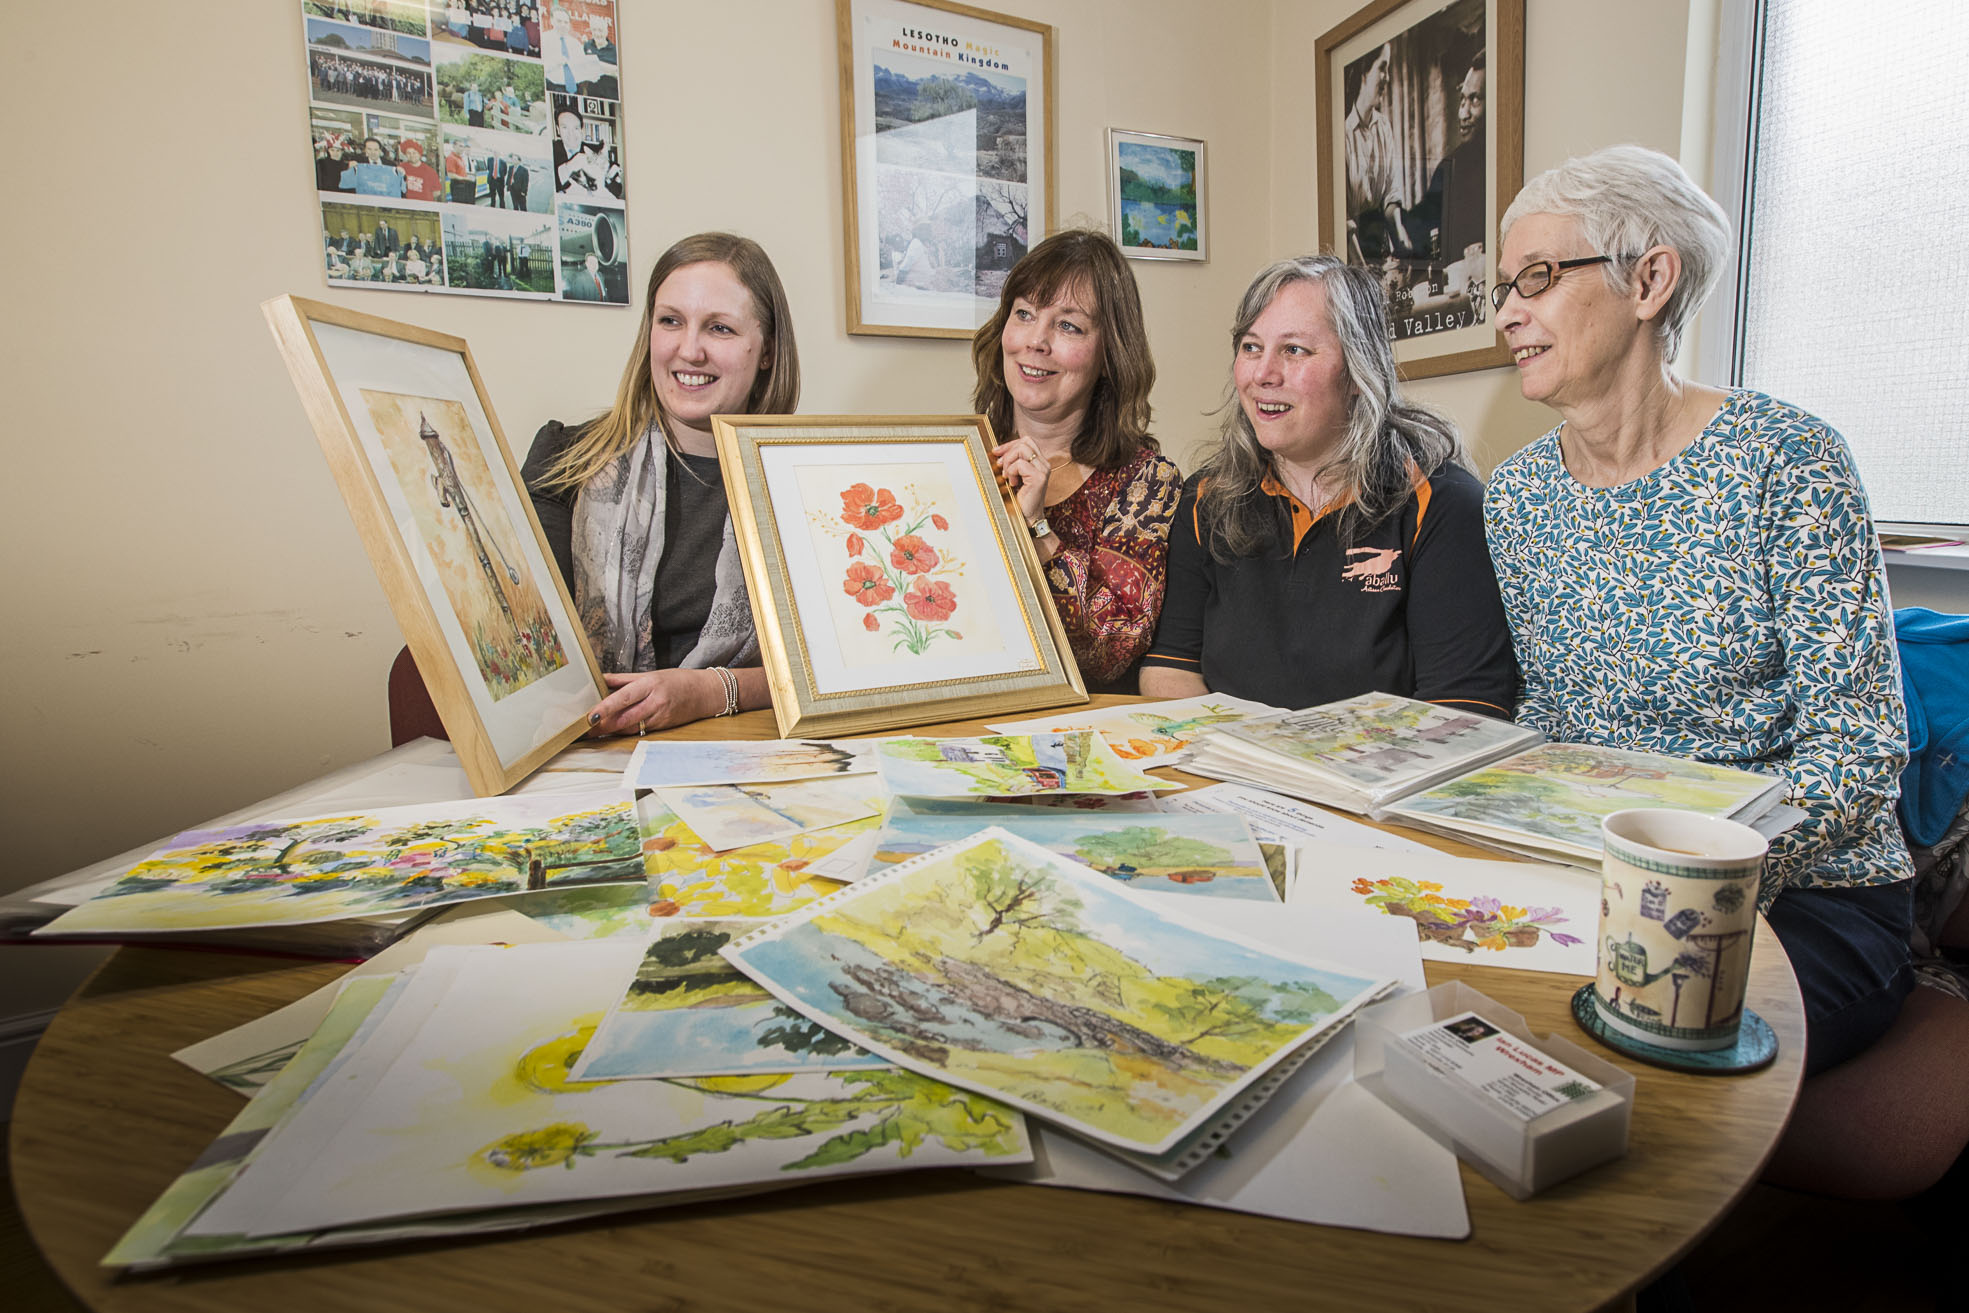 Remarkable paintings by artist with dementia to go on show